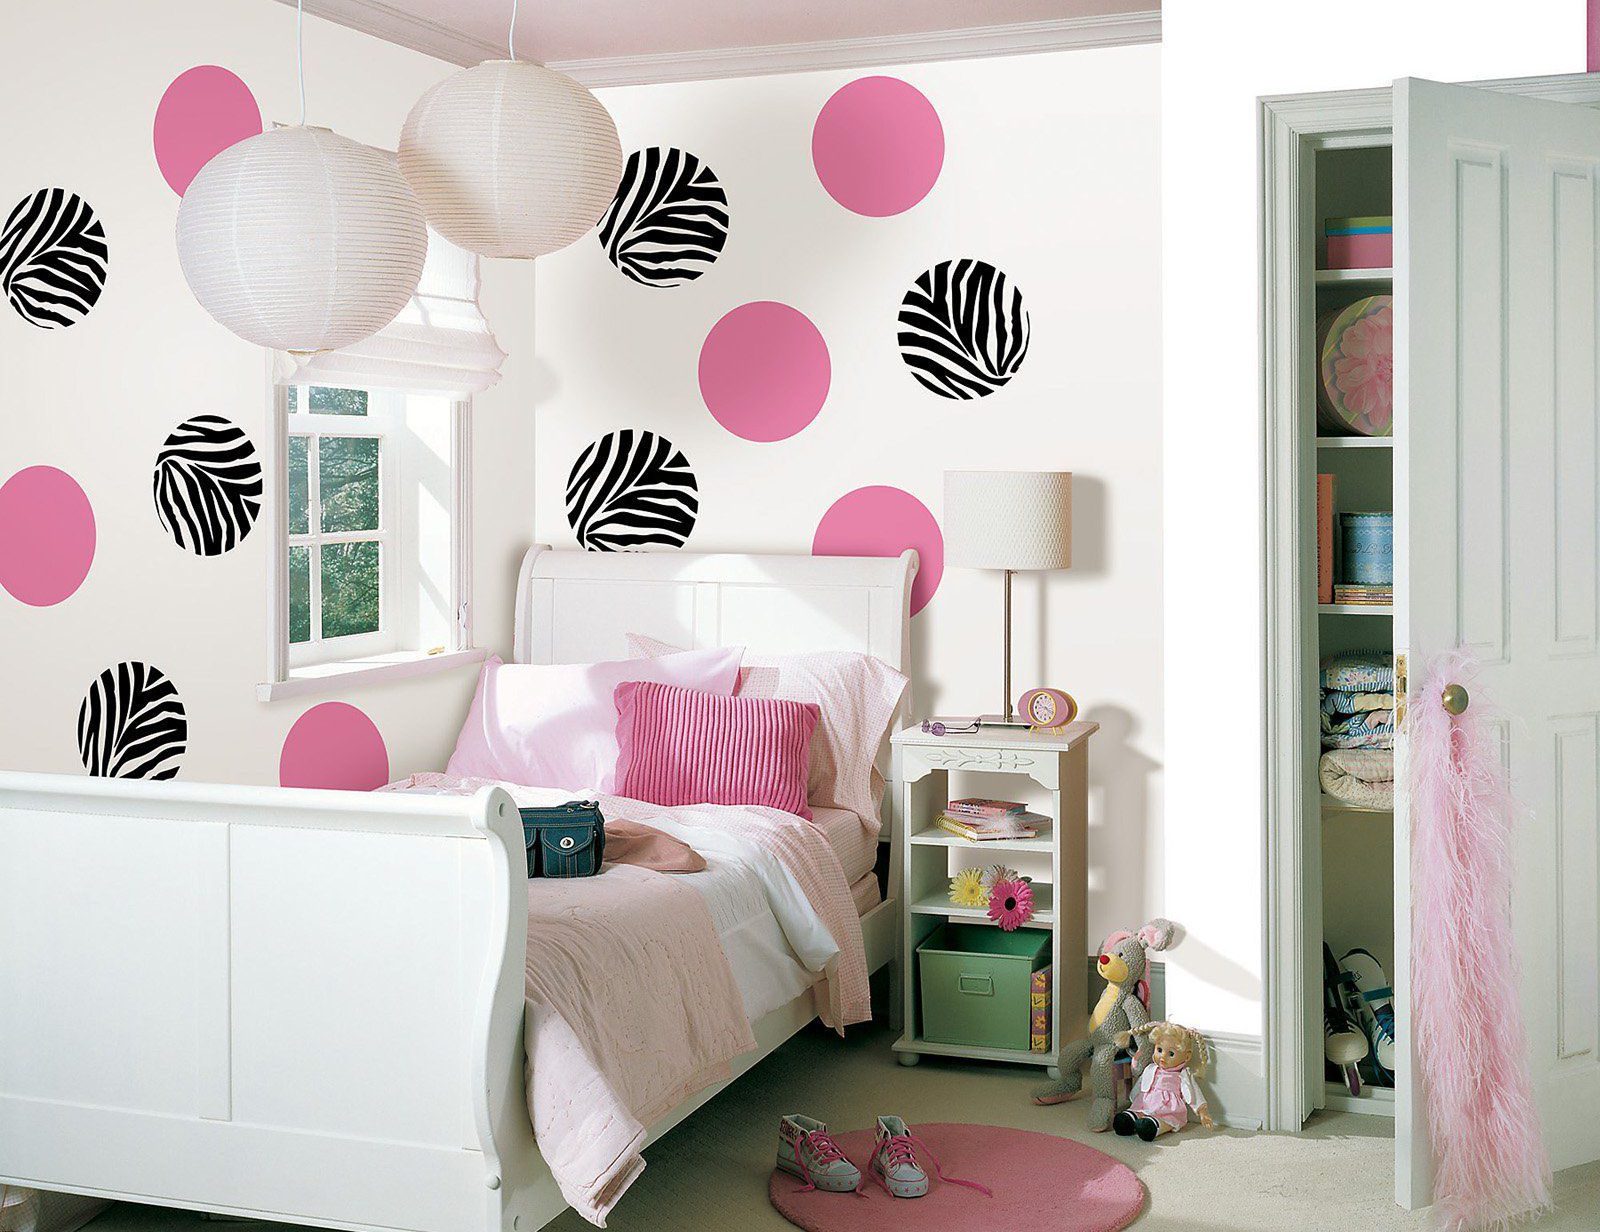 Make Your Wall Beautiful with Pattern